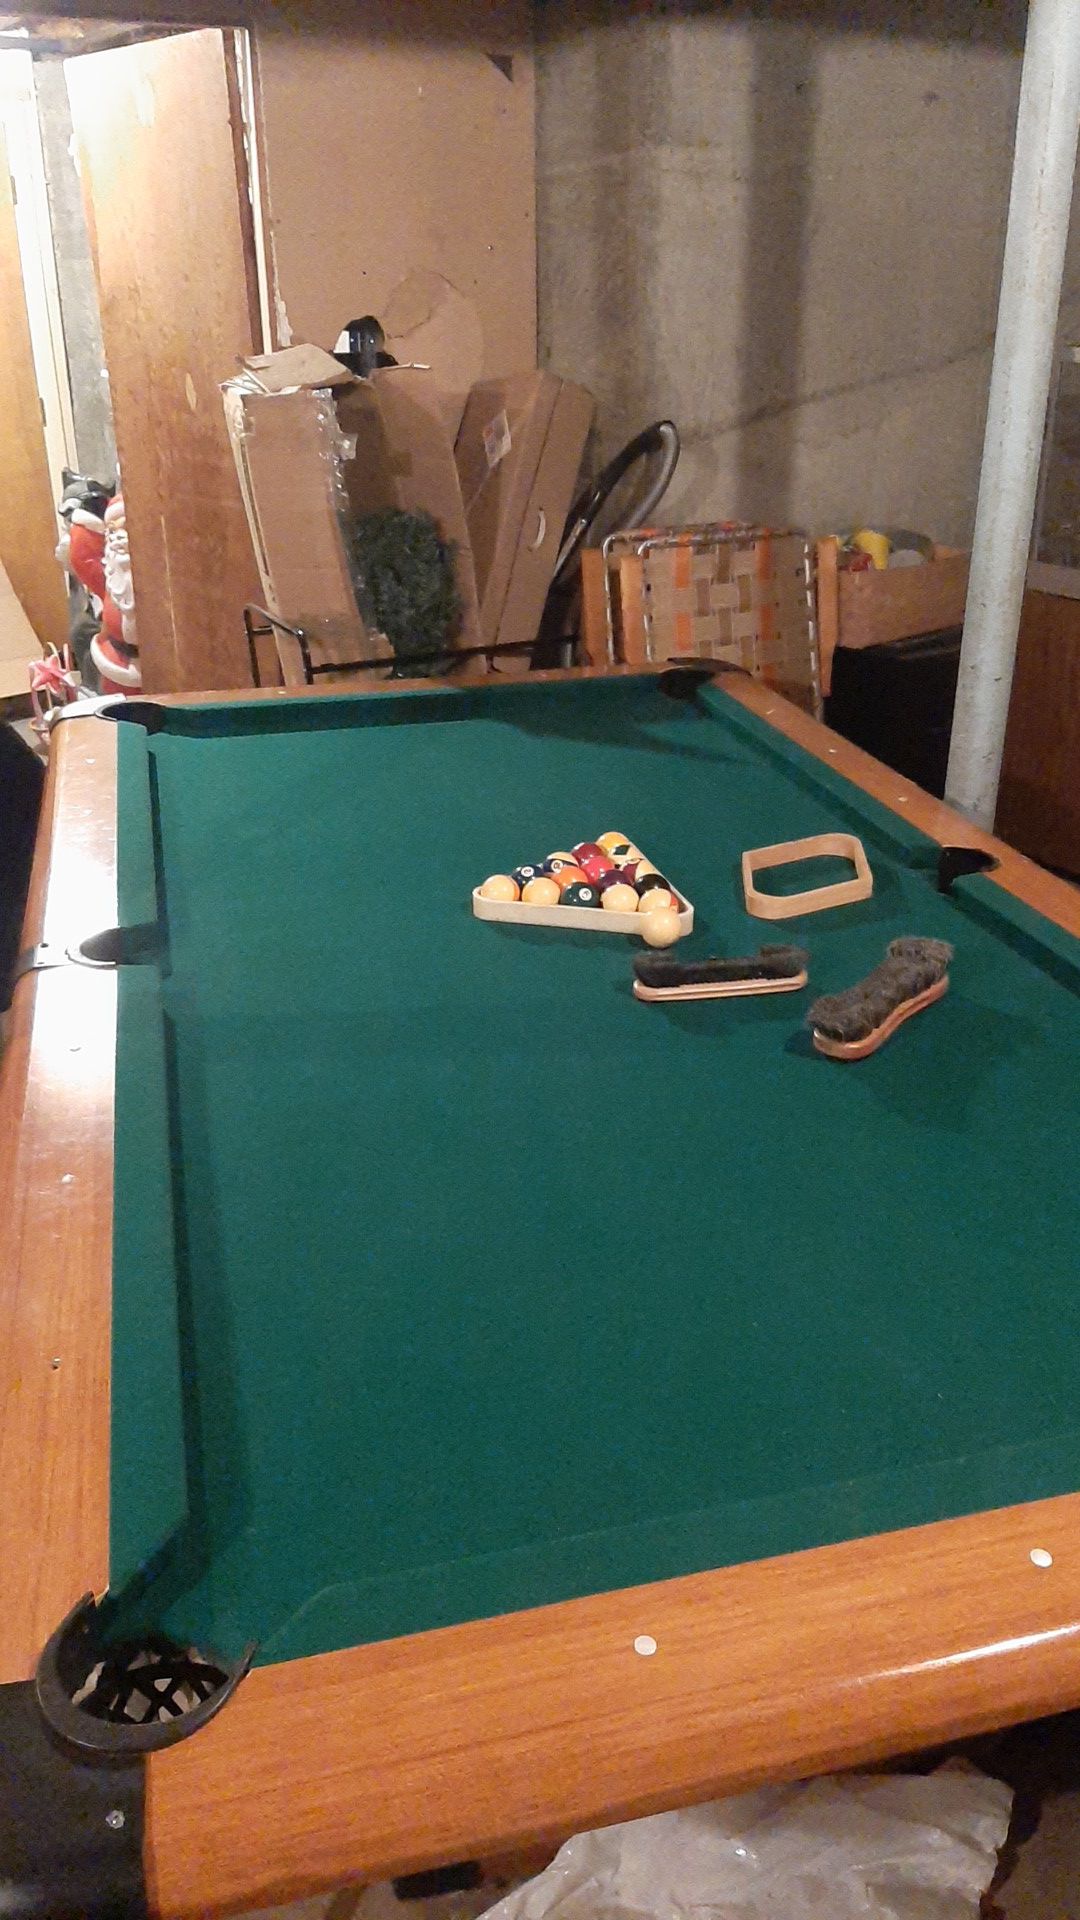 Pool table with sticks and balls